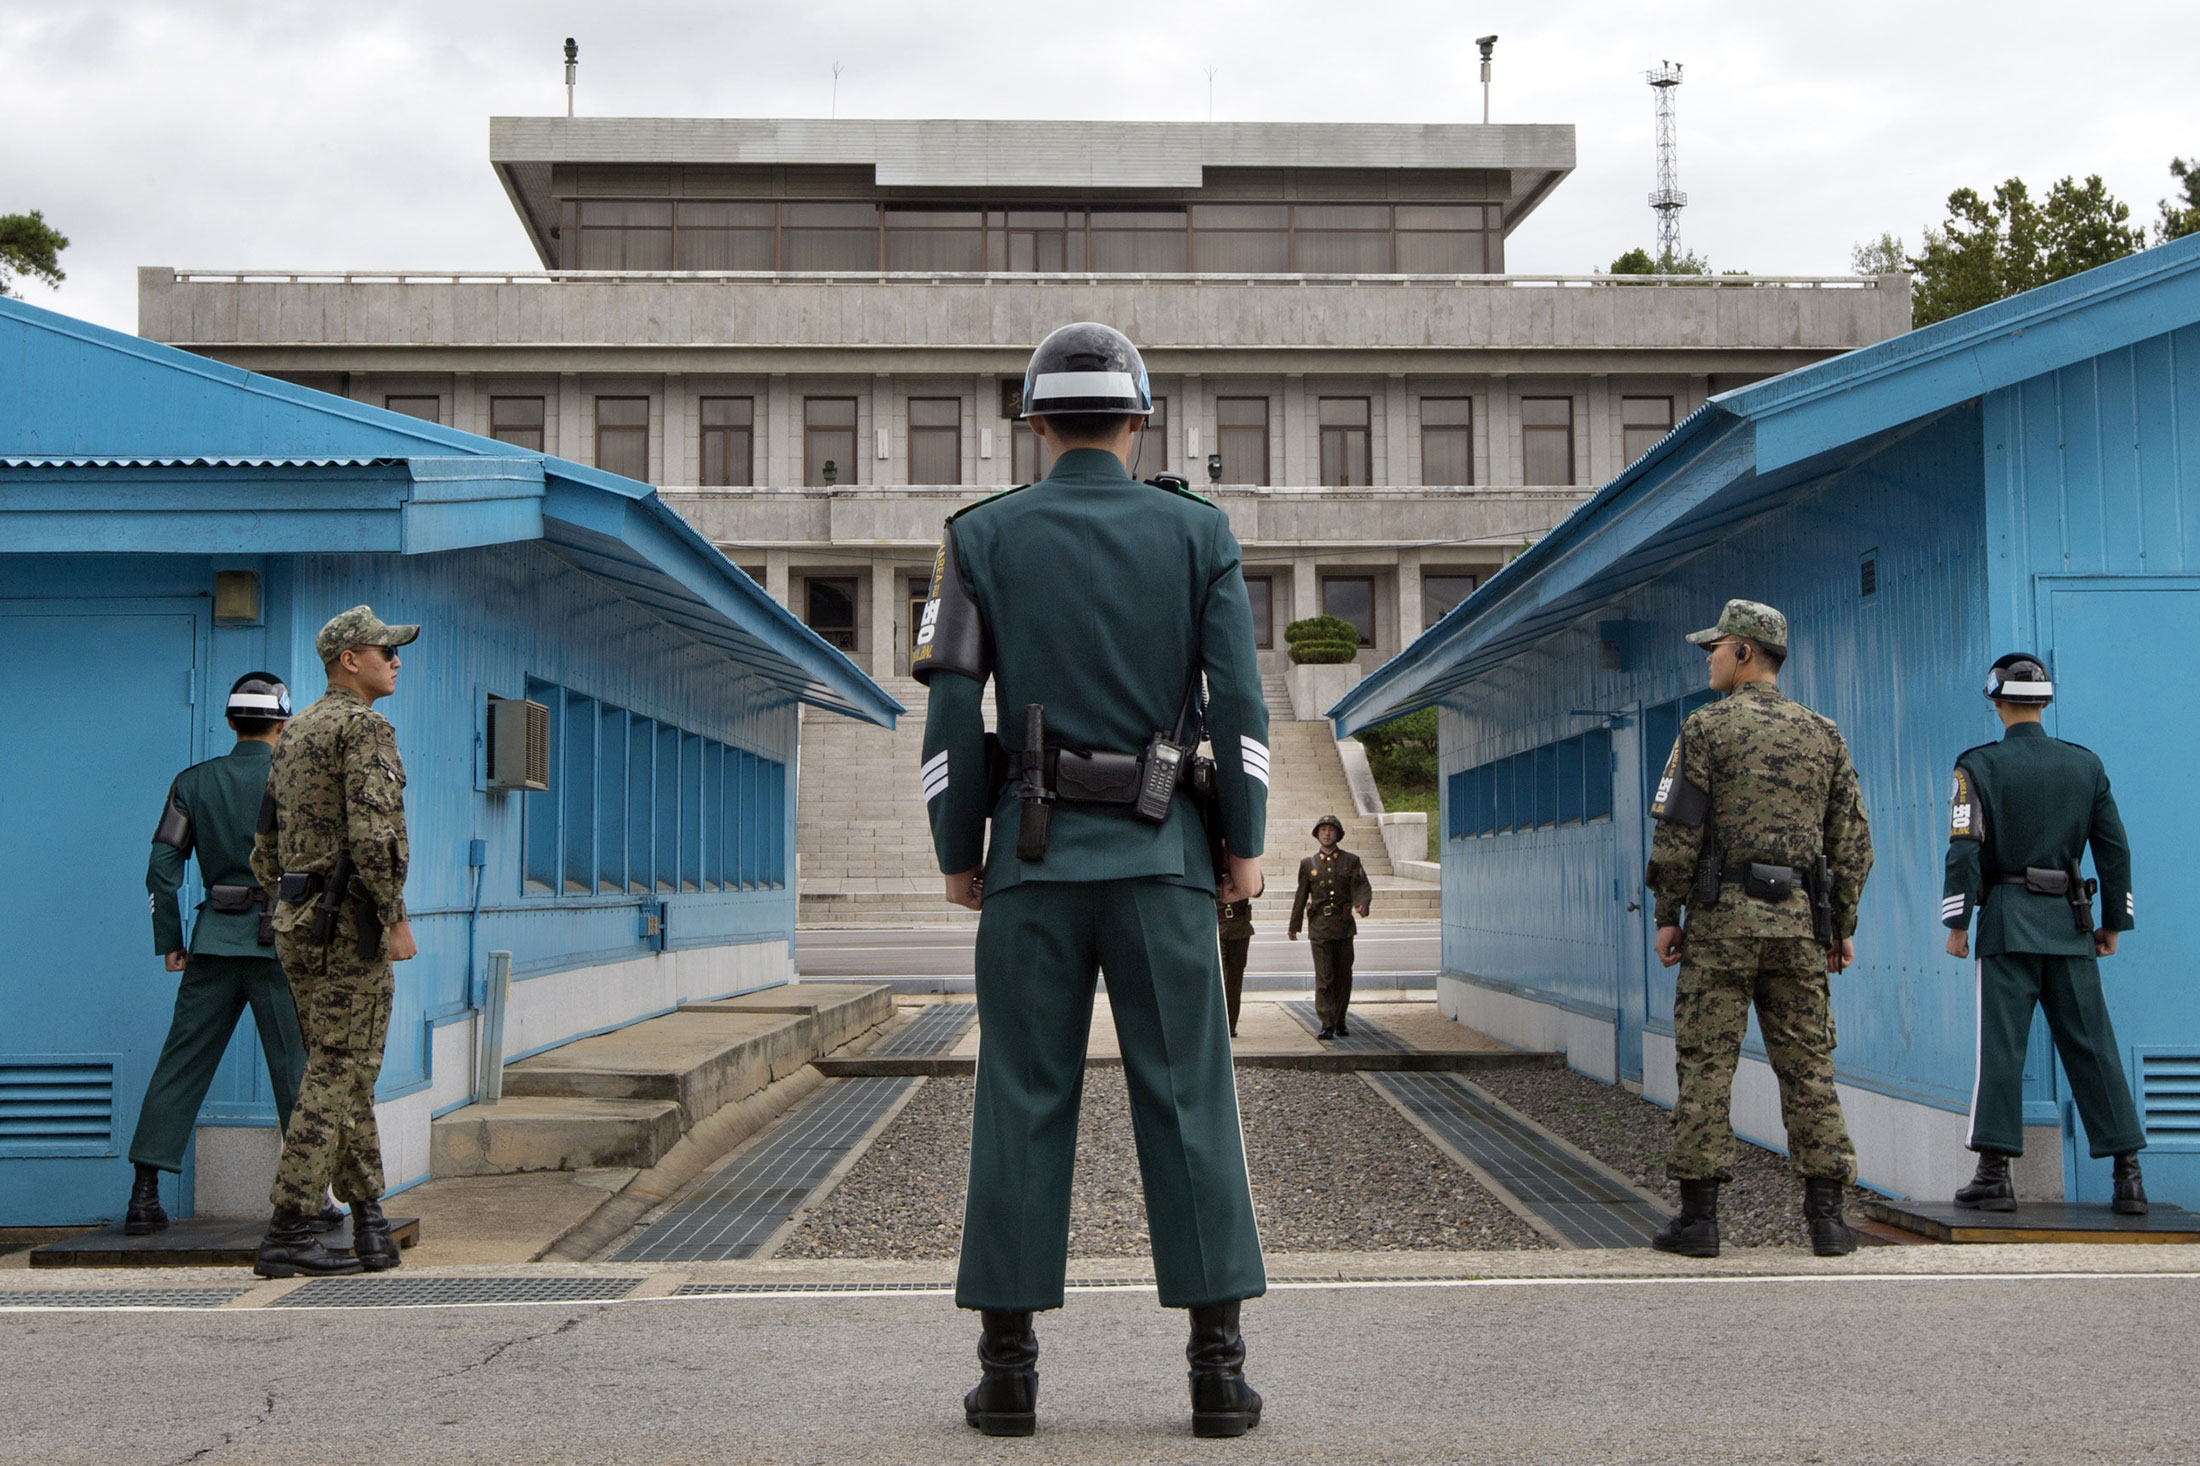 South Korea Fires Warning Shots Over Border as Tensions Rise Bloomberg